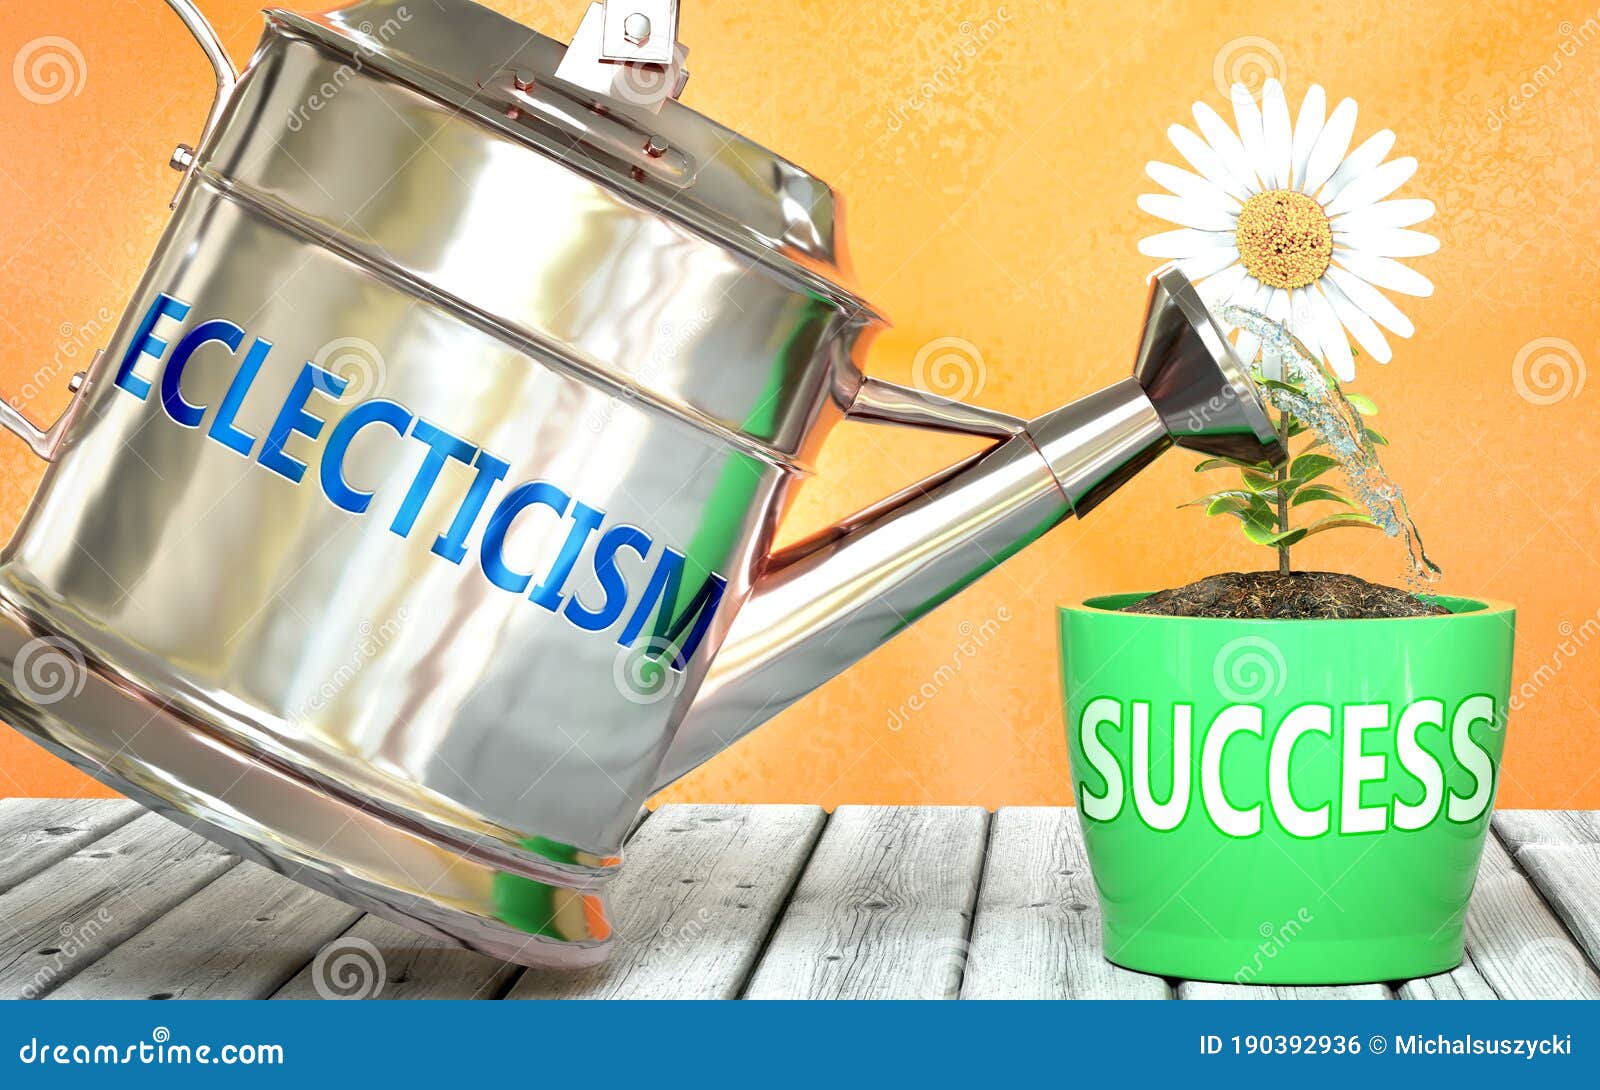 eclecticism helps achieve success - pictured as word eclecticism on a watering can to show that it makes success to grow and it is